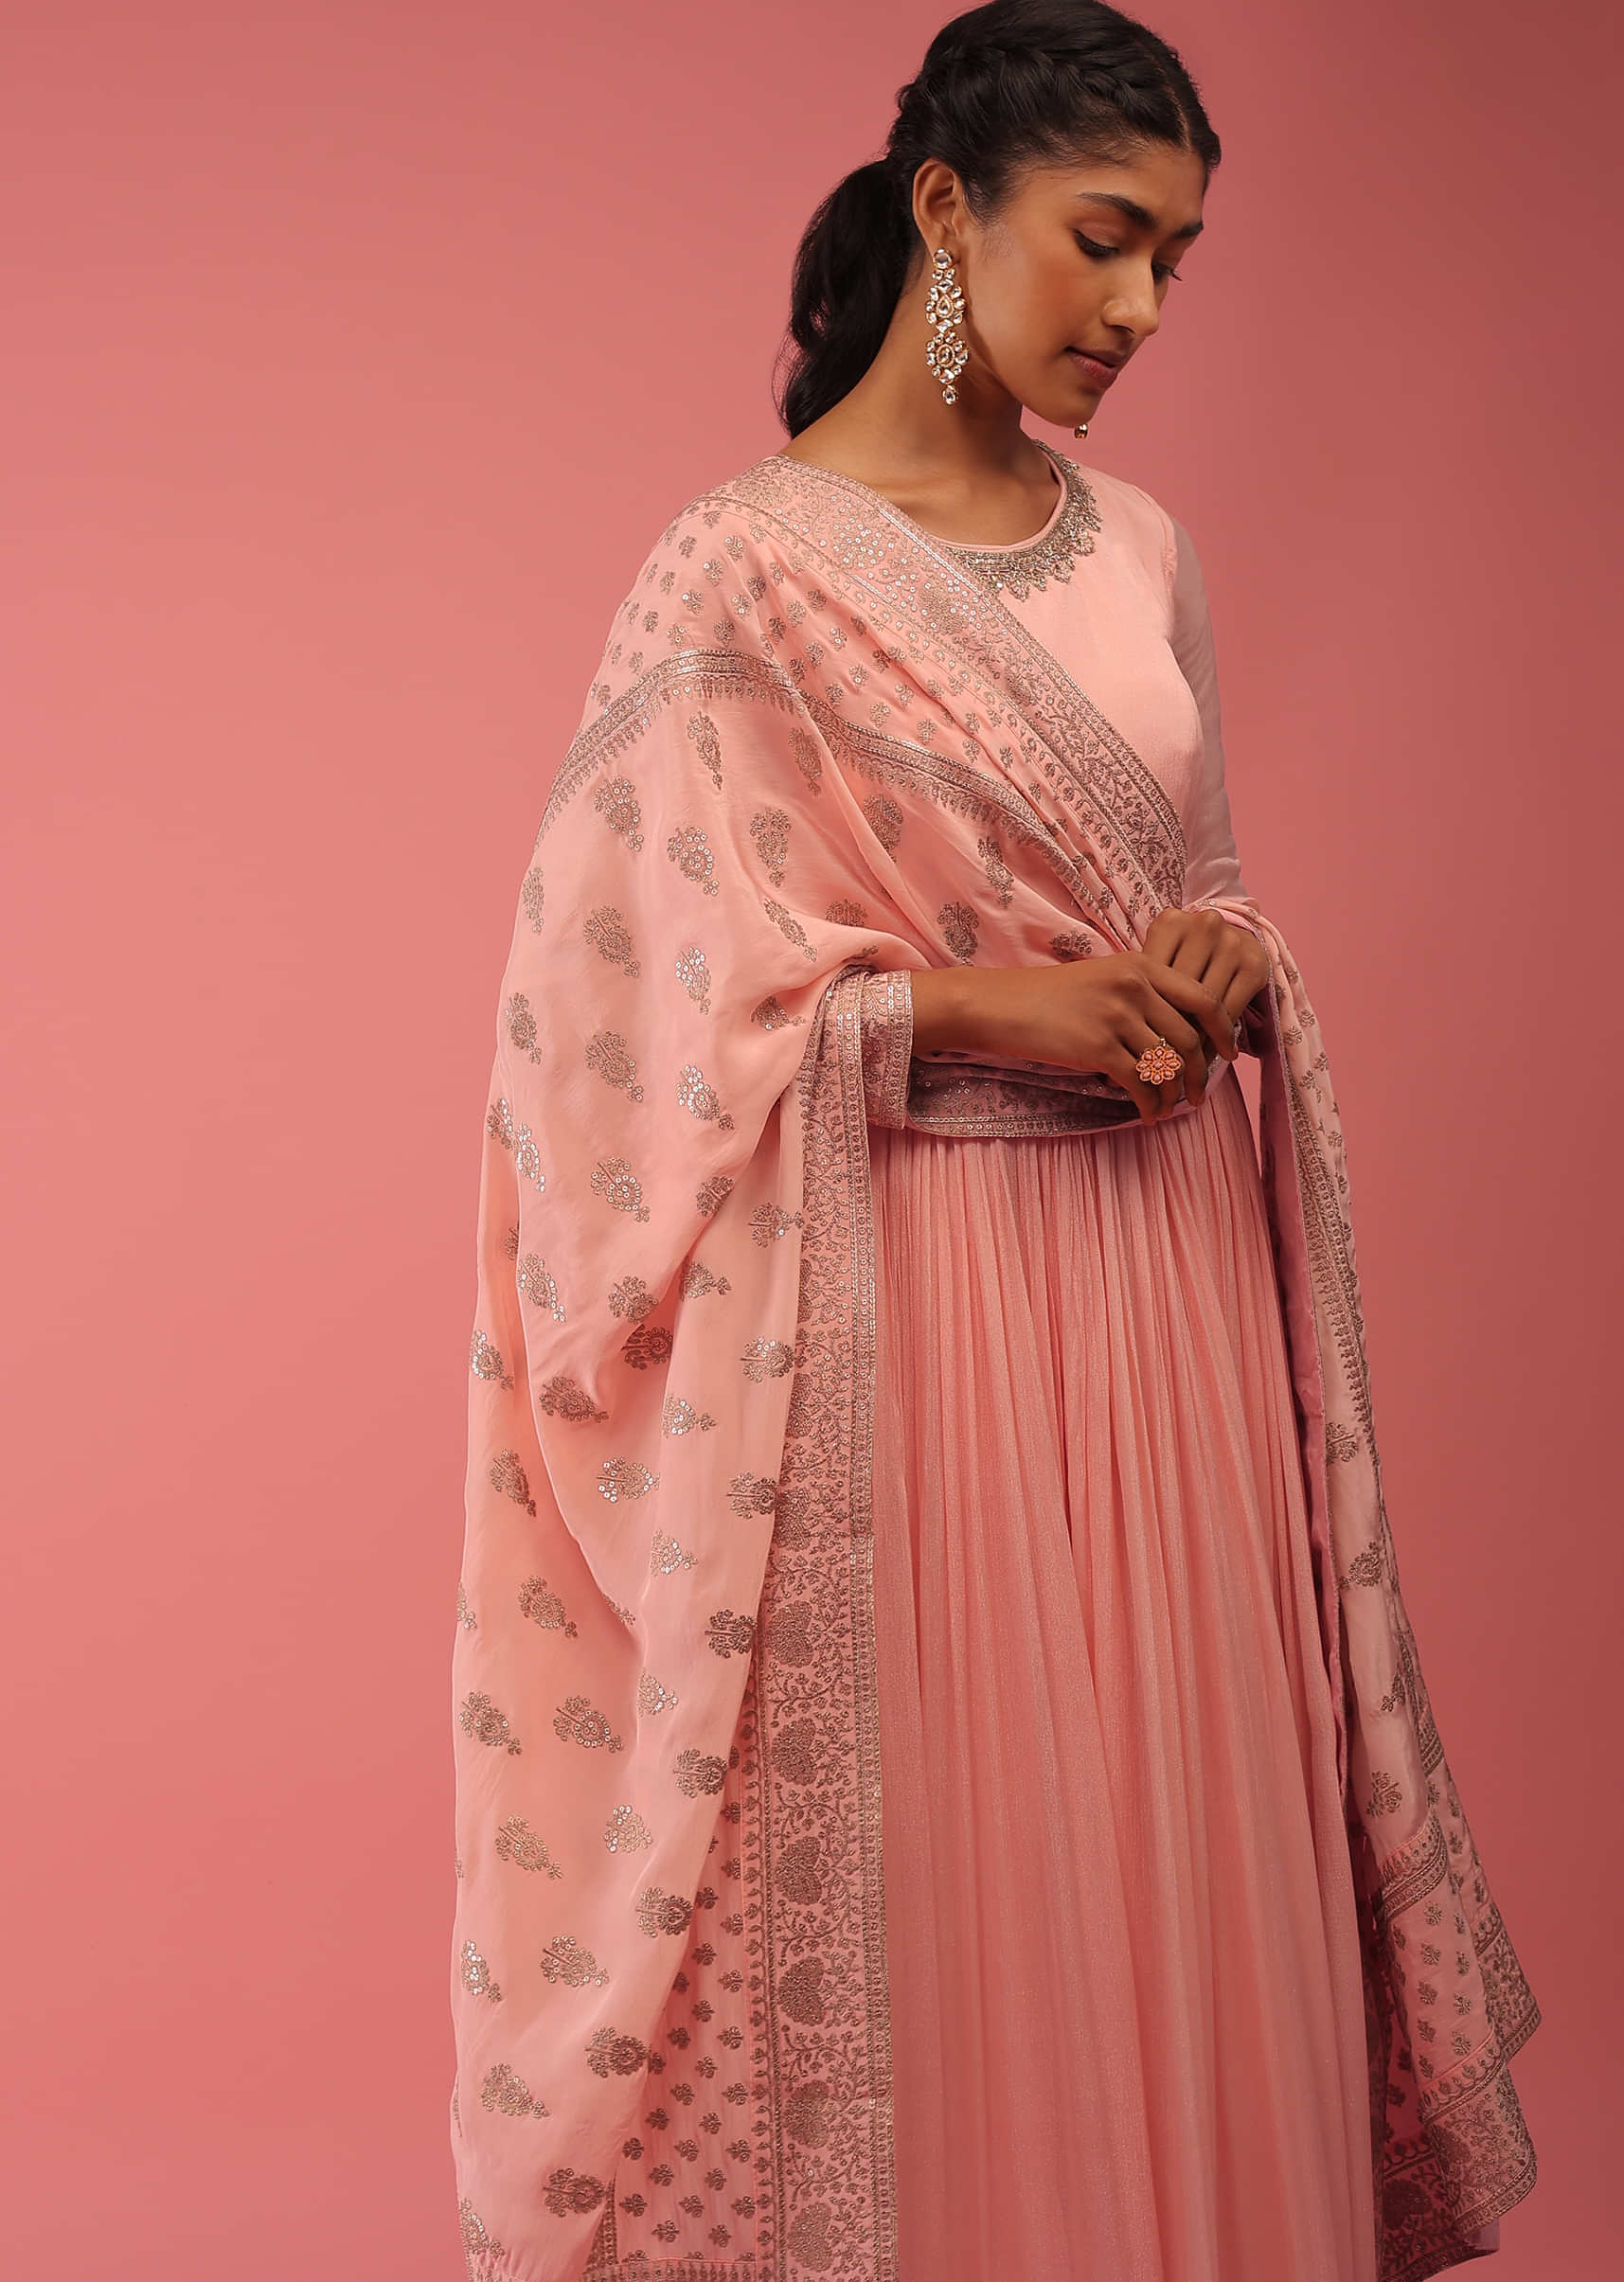 Powder Pink Anarkali Suit In Cut Dana Embroidery, It Is Crafted In Chiffon With Full Sleeves And Round Neckline